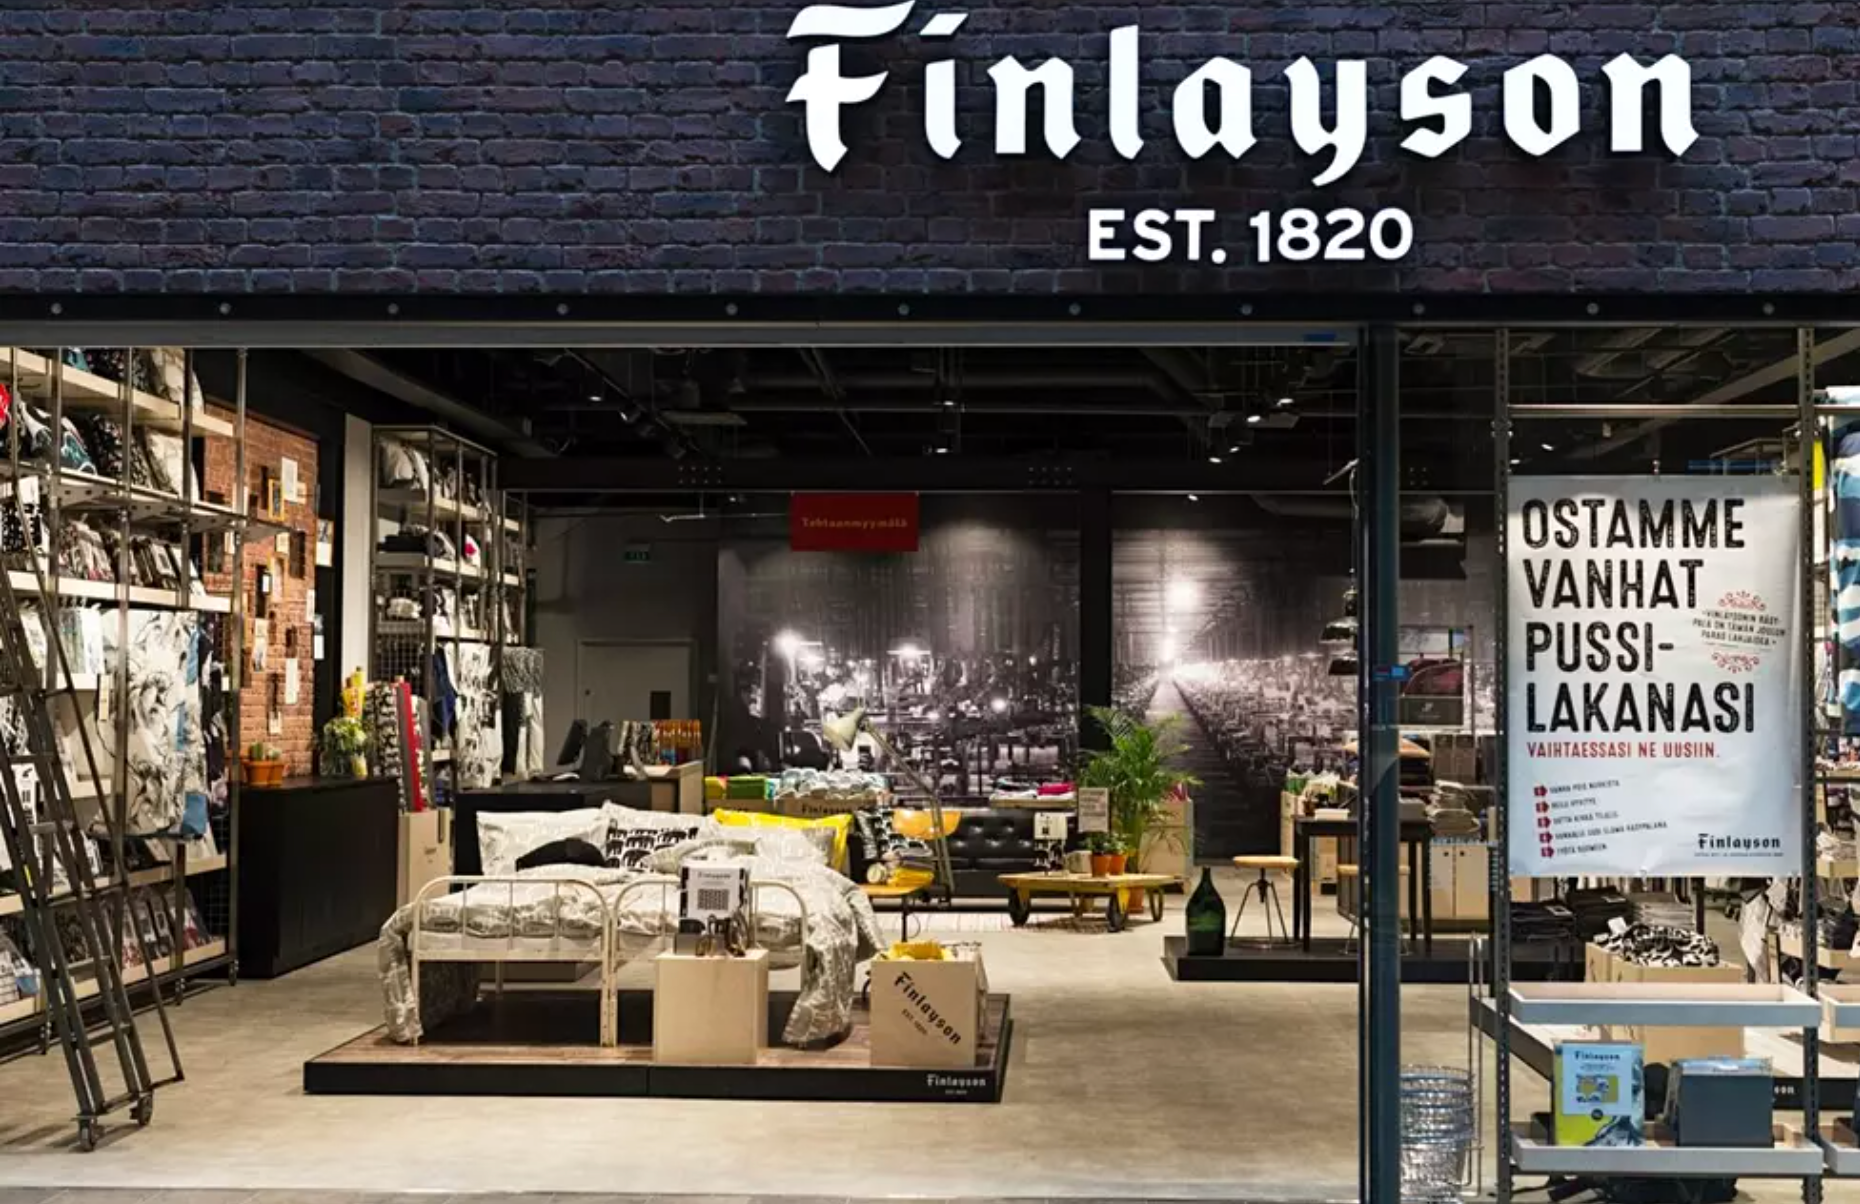 Customer Success Stories - Finlayson: How the iconic textile company discovered new growth opportunities with Sellforte’s Marketing Effectiveness Platform